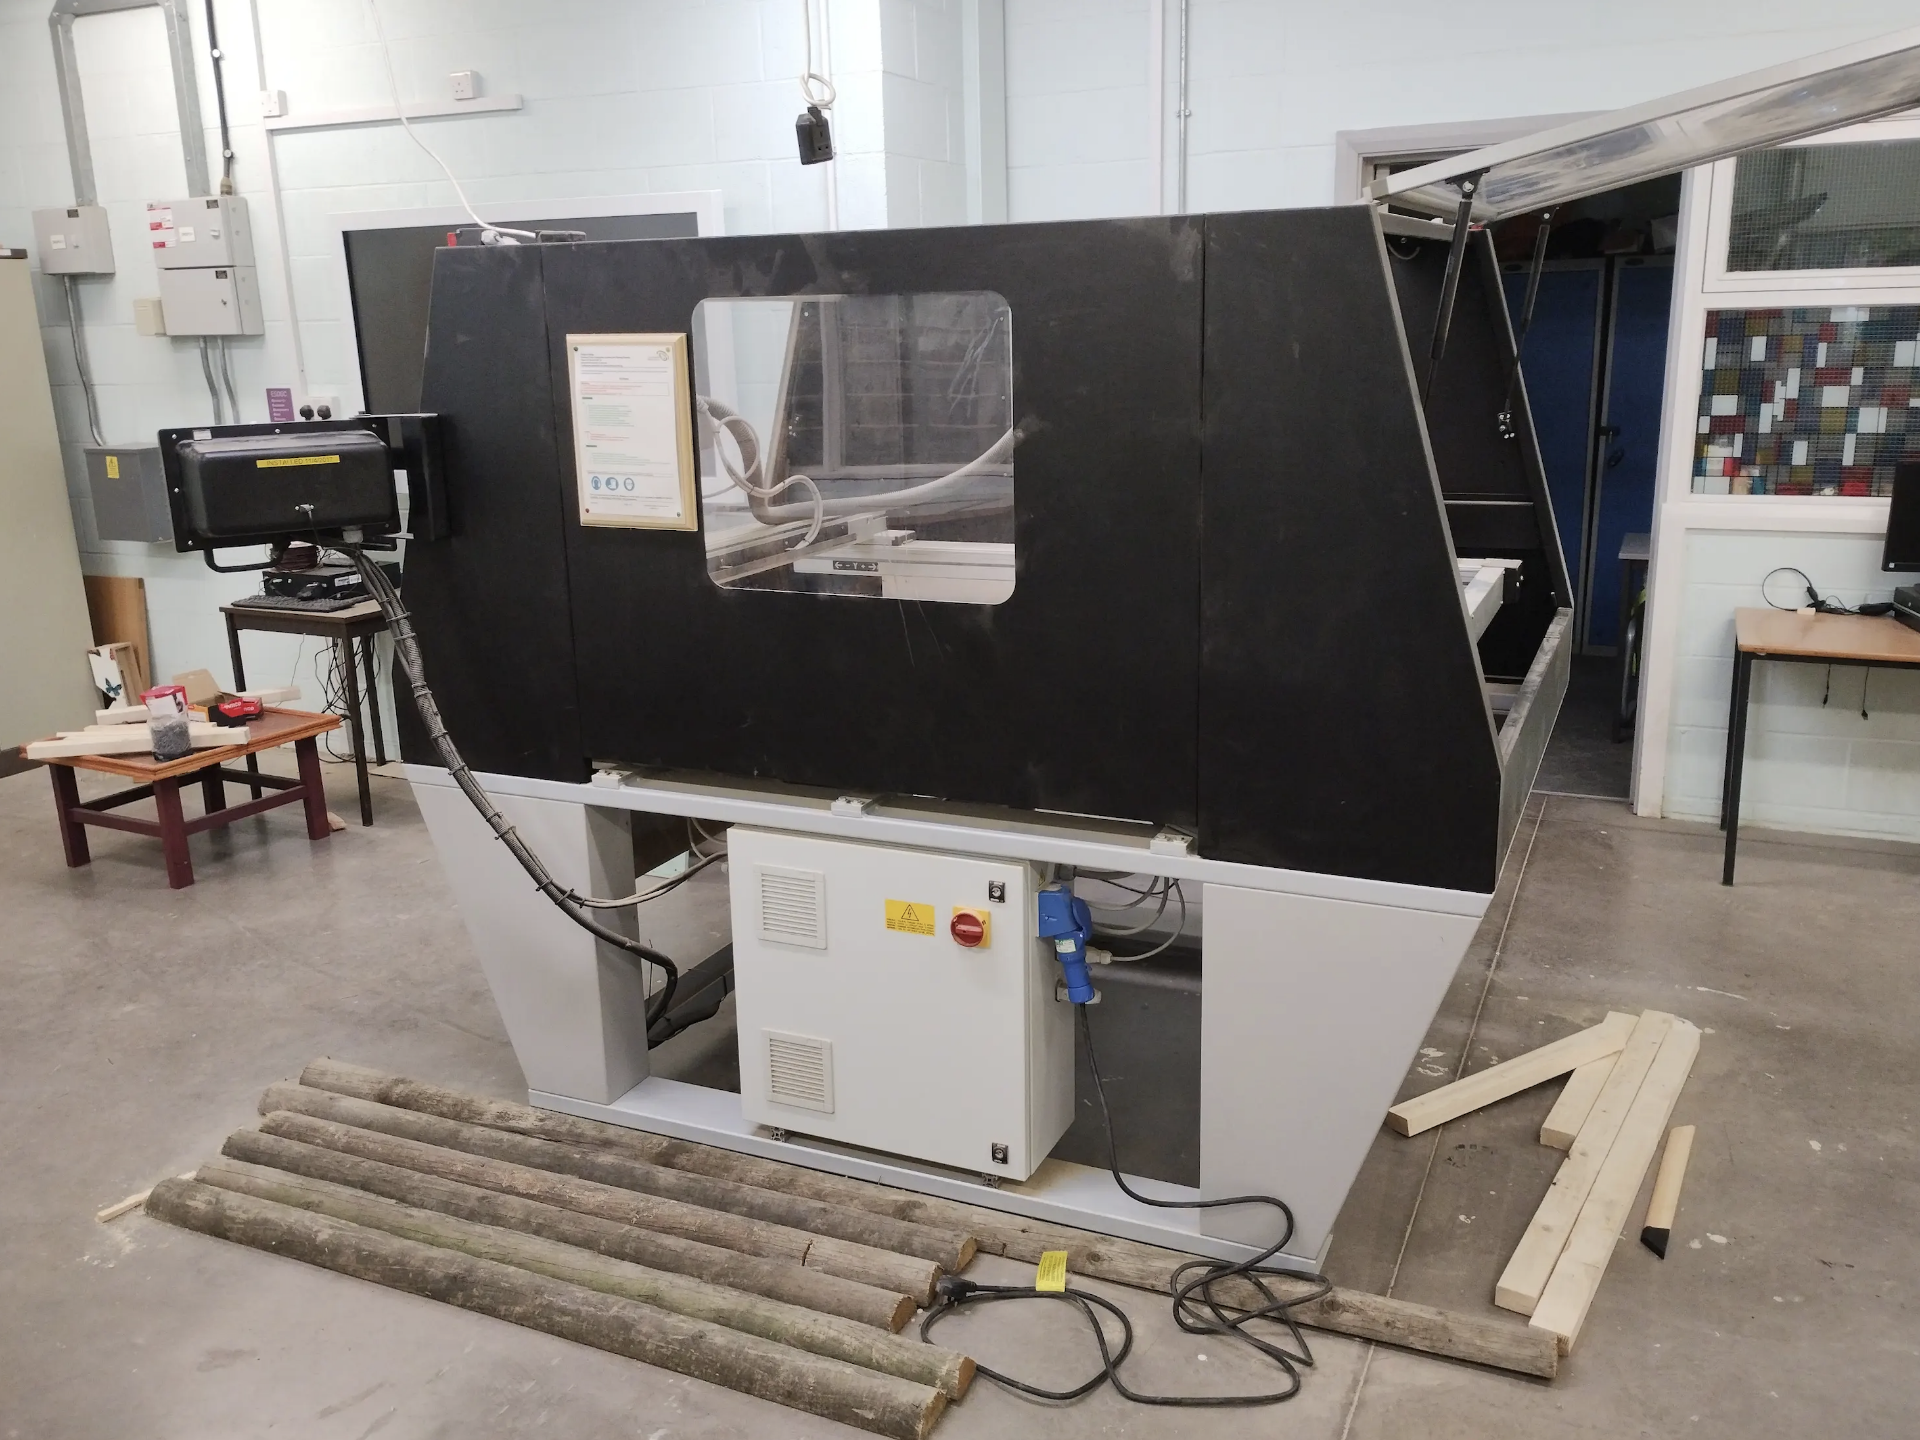 Trend Smartfast CNC Carpentry Router (Approx. 6 yrs old) Ref: 7045-0317-SK01 - Image 4 of 10